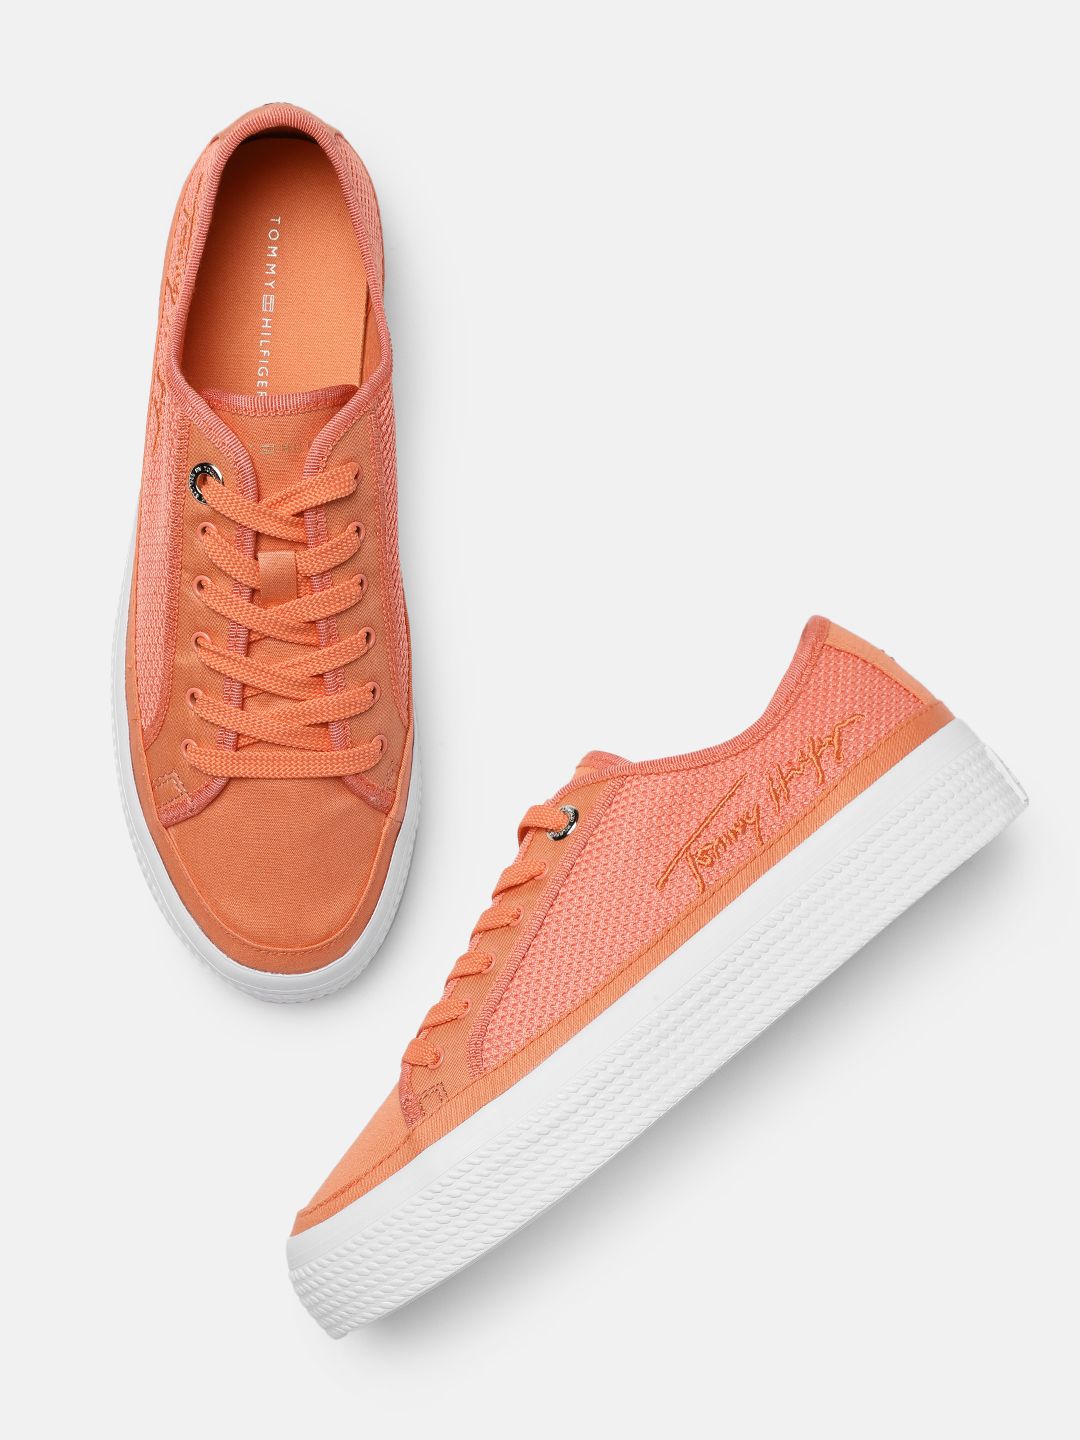 Tommy Hilfiger Women Coral Orange Woven Design Regular Sneakers Price in India